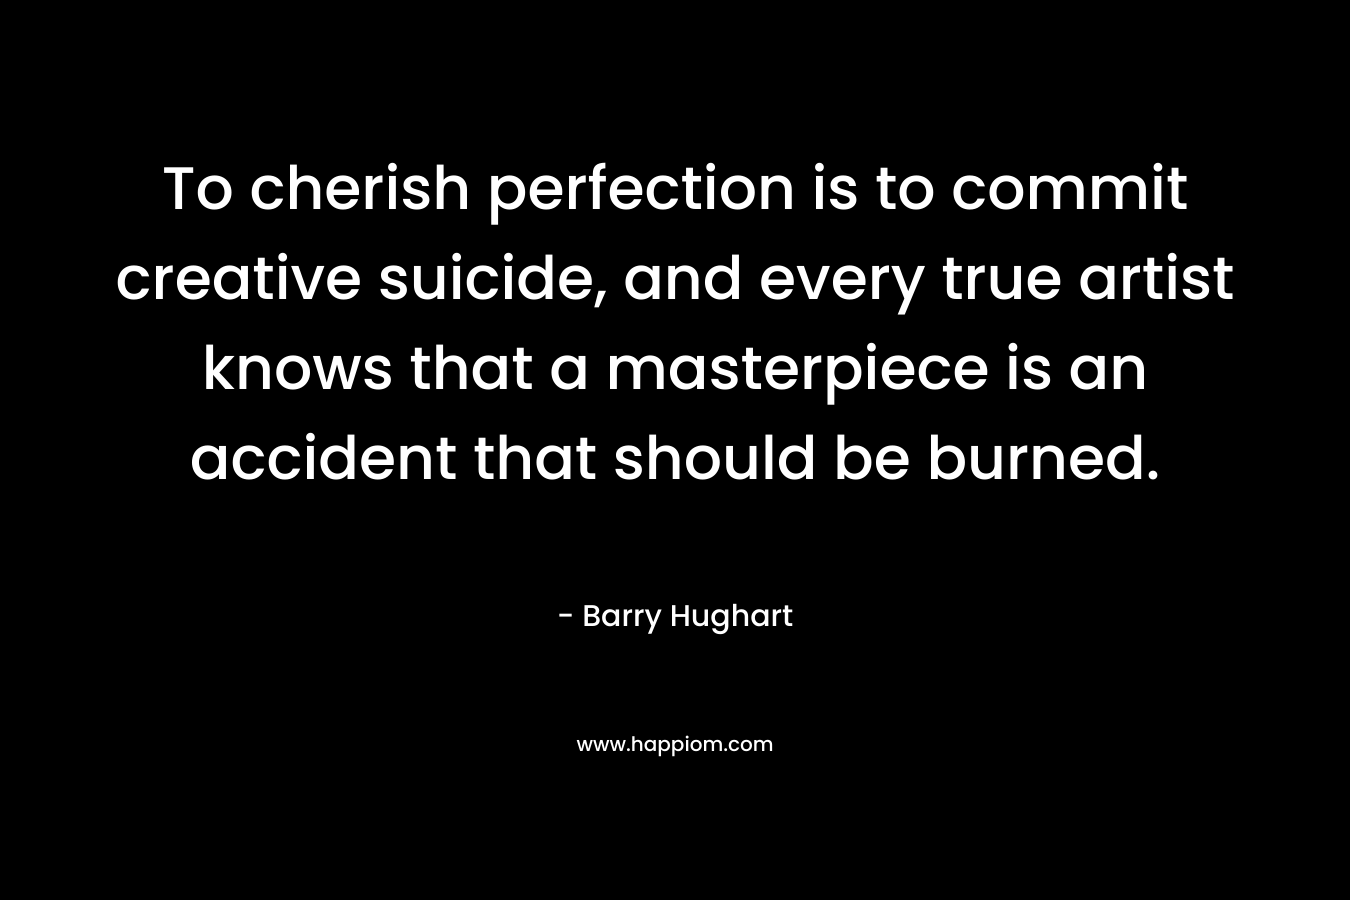 To cherish perfection is to commit creative suicide, and every true artist knows that a masterpiece is an accident that should be burned.